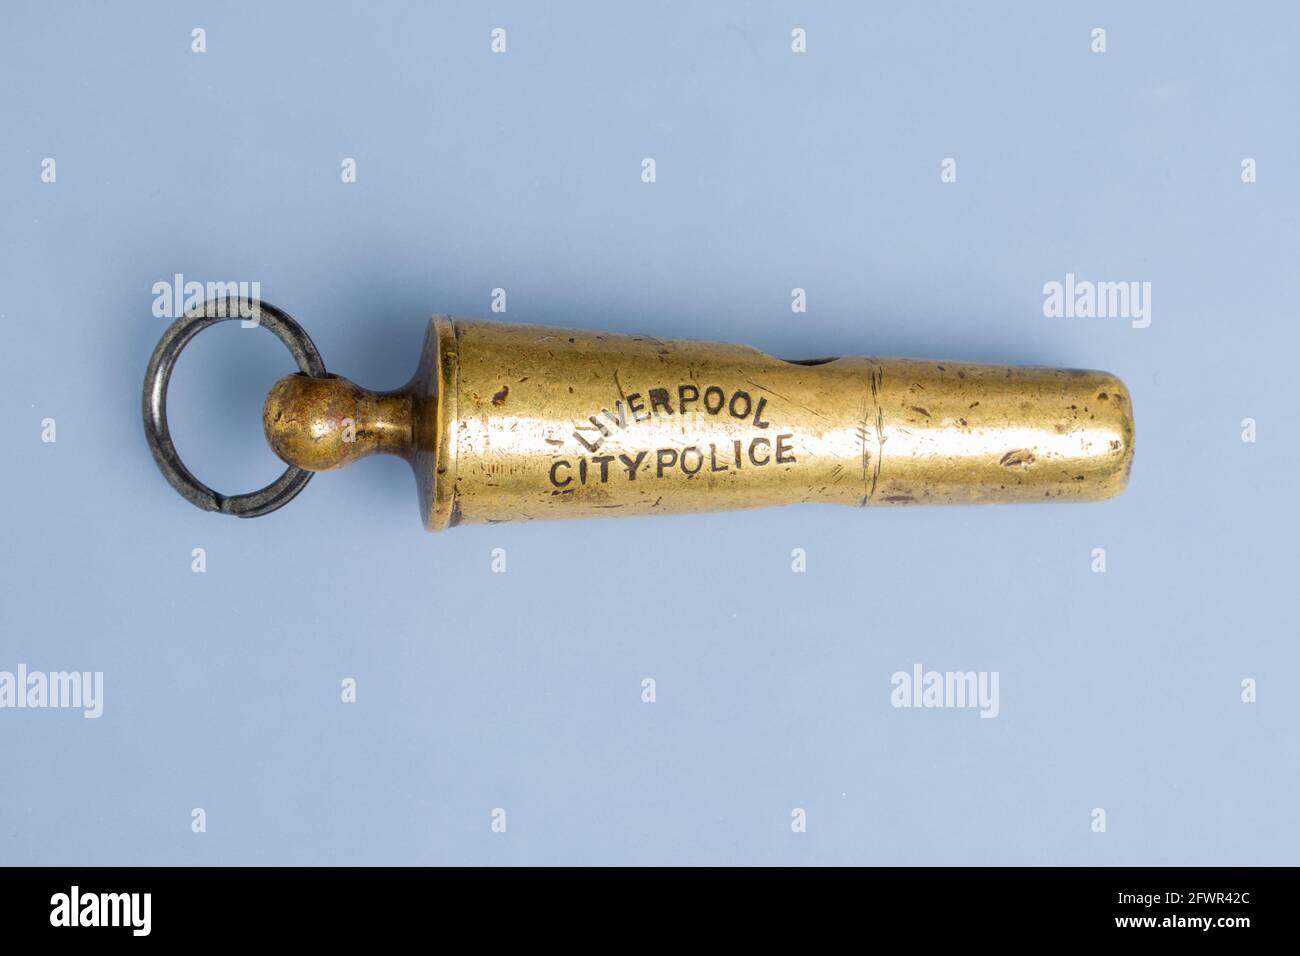 Conical 'Beaufort' whistle made by R. A. Walton for the Liverpool City Police, 1890s Stock Photo